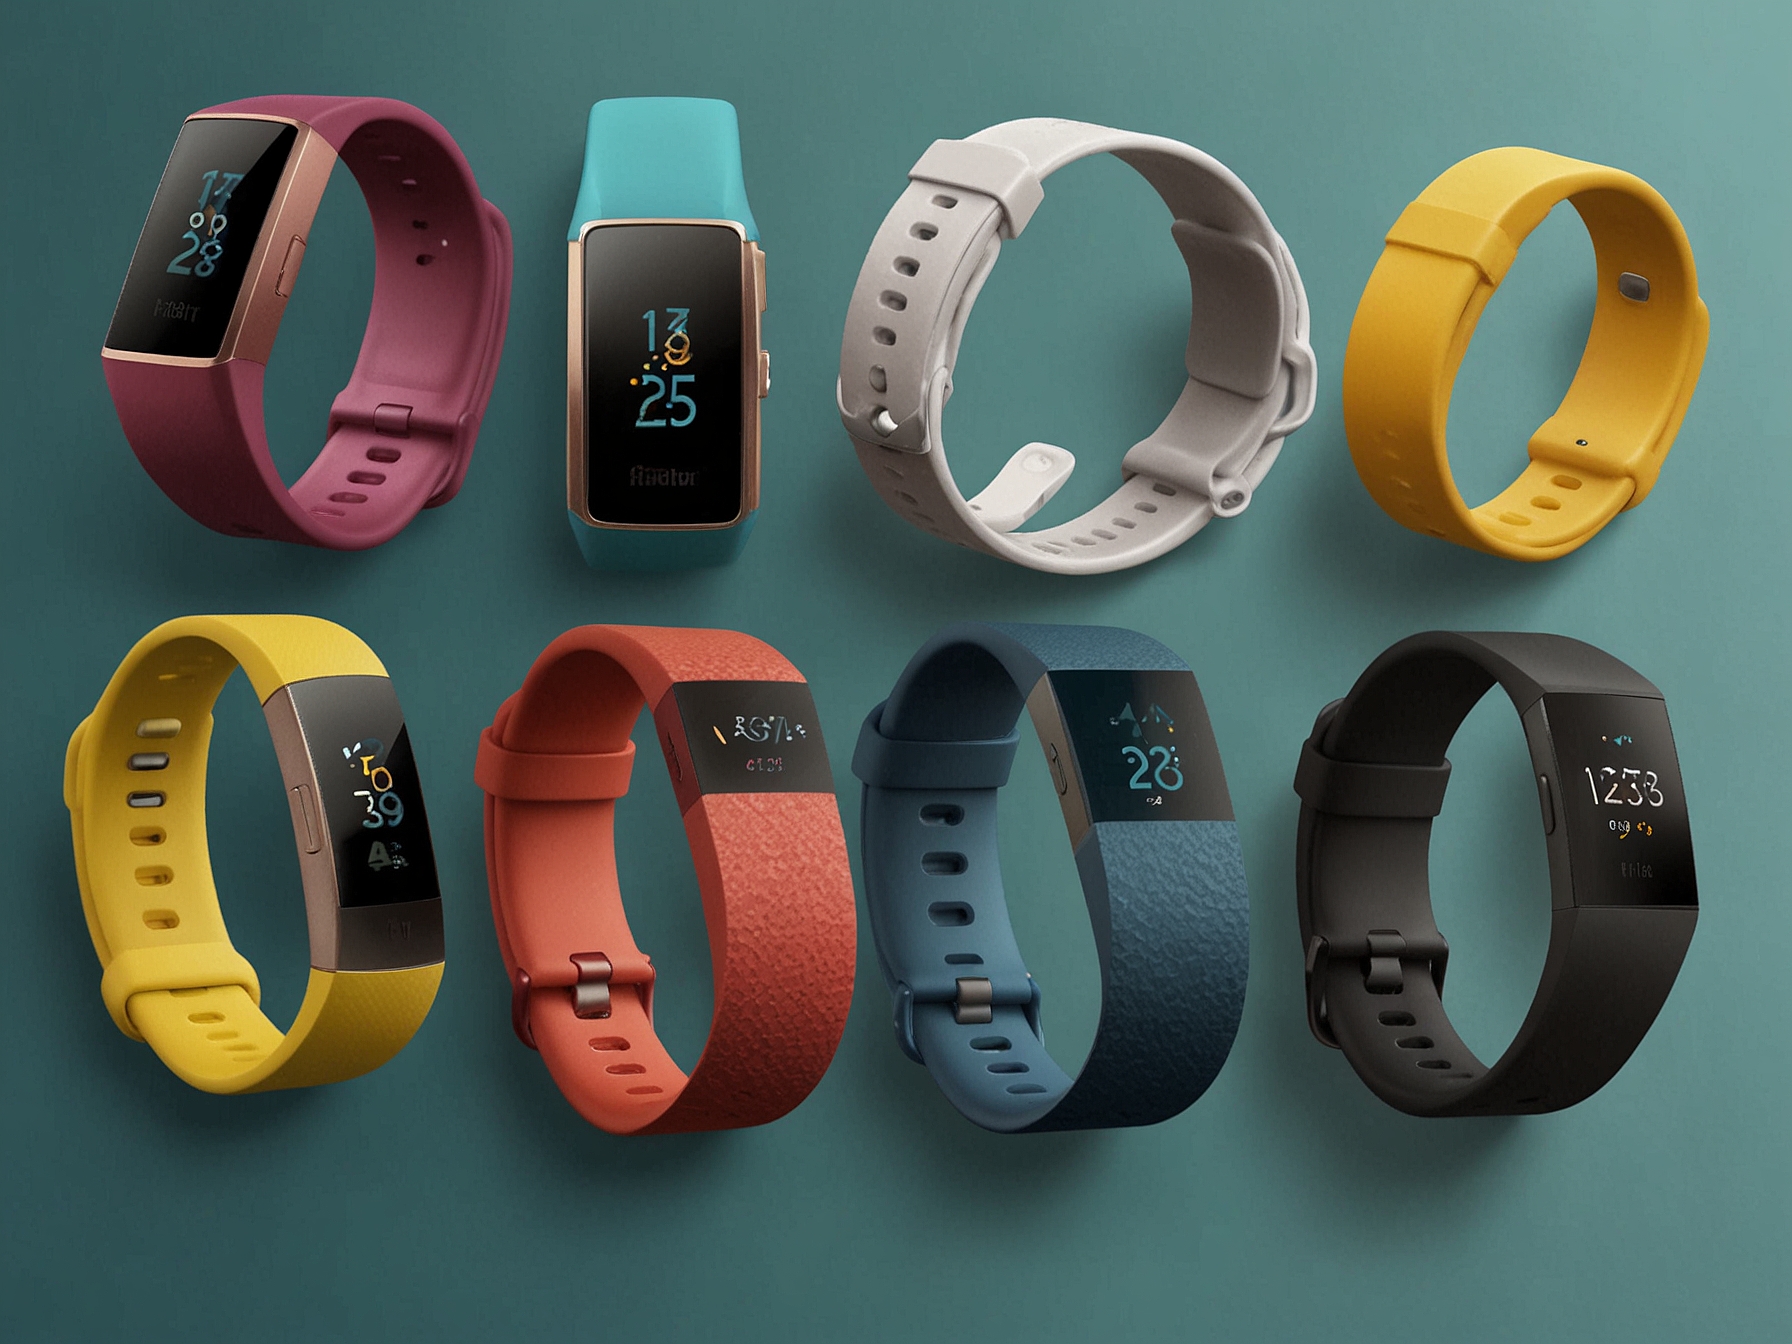 A collection of Fitbit devices including the Versa 4 and Charge 5, highlighted with discount tags. The image suggests the variety of options available for different fitness levels and preferences during Prime Day sales.